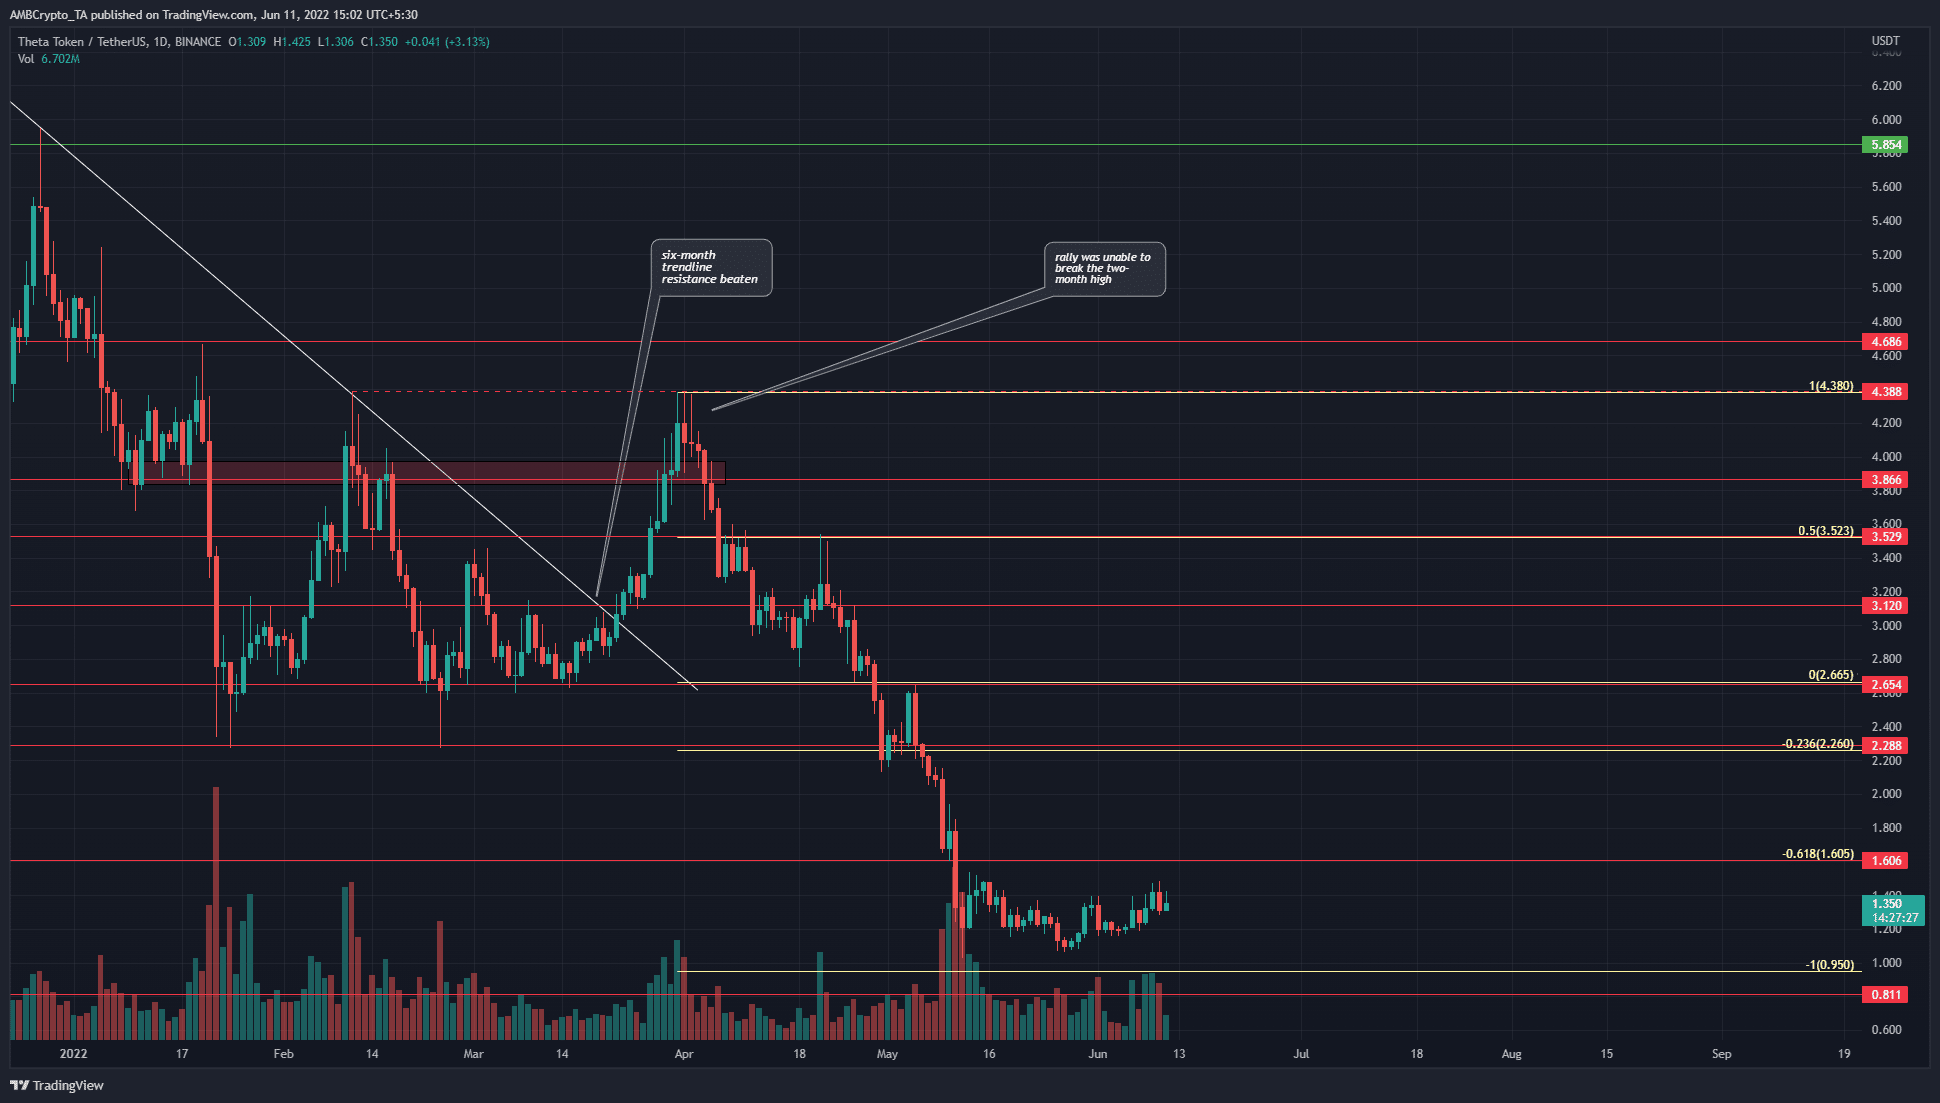 THETA has traded within a range in the past month, watch out for these levels